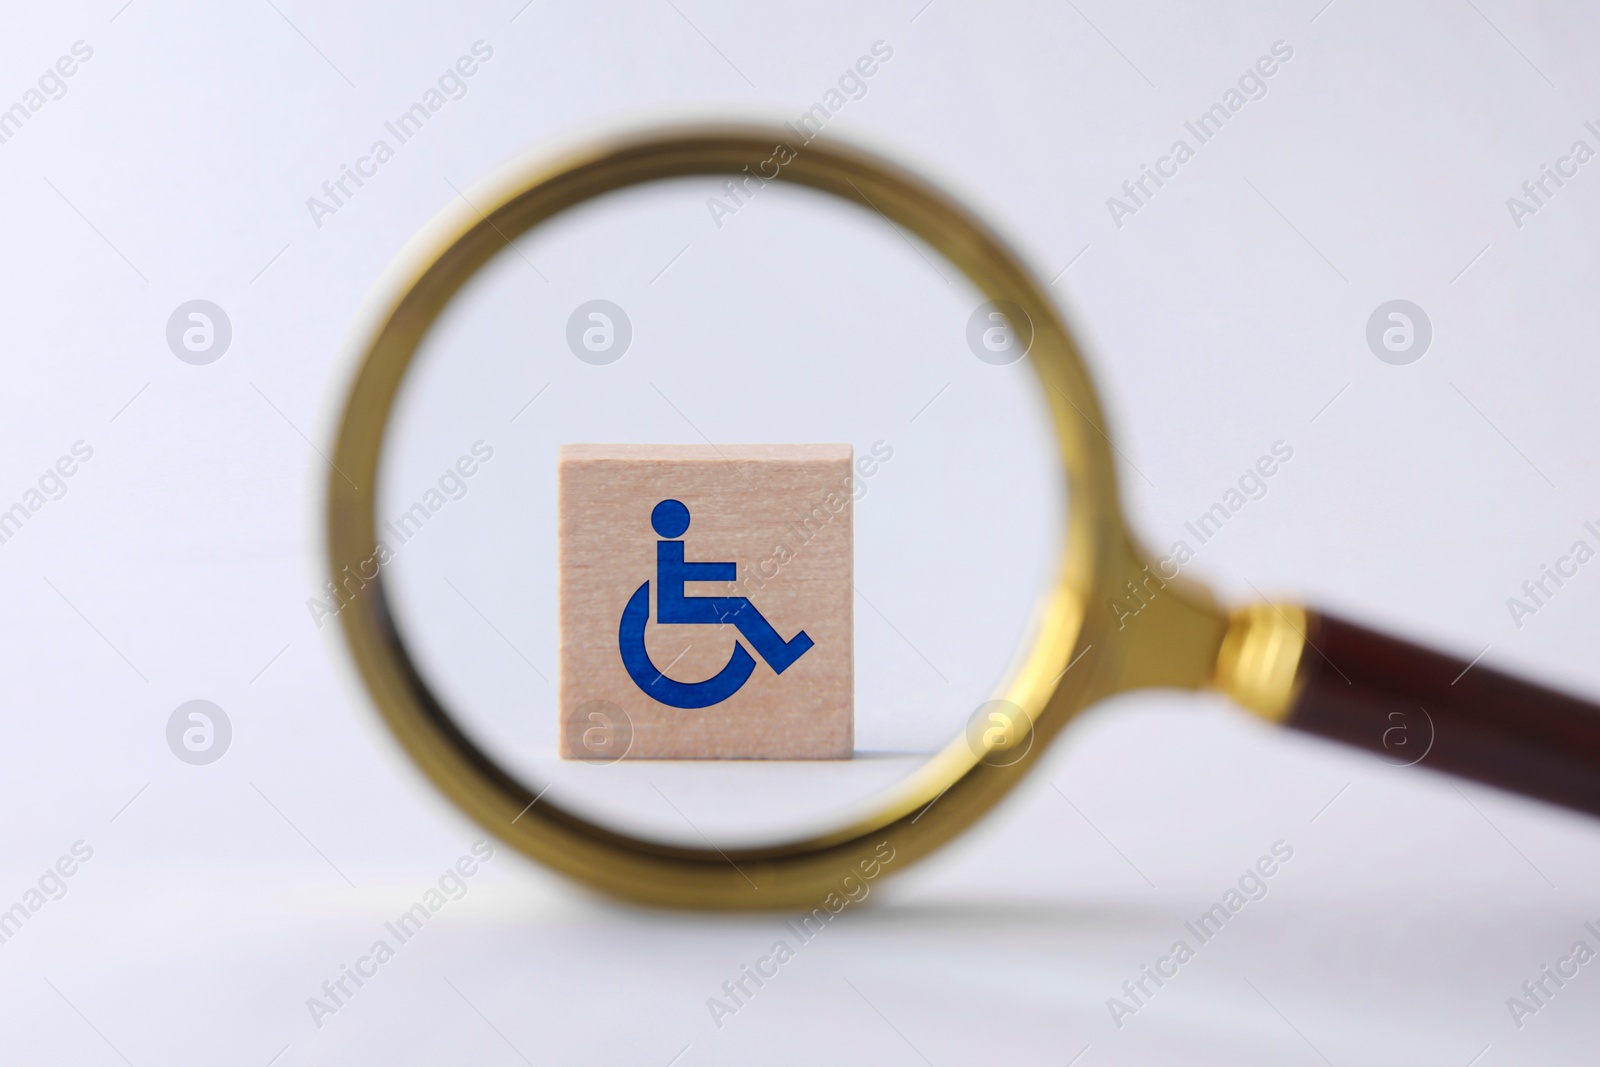 Image of Inclusion concept. Wooden cube with international symbol of access, view through magnifying glass